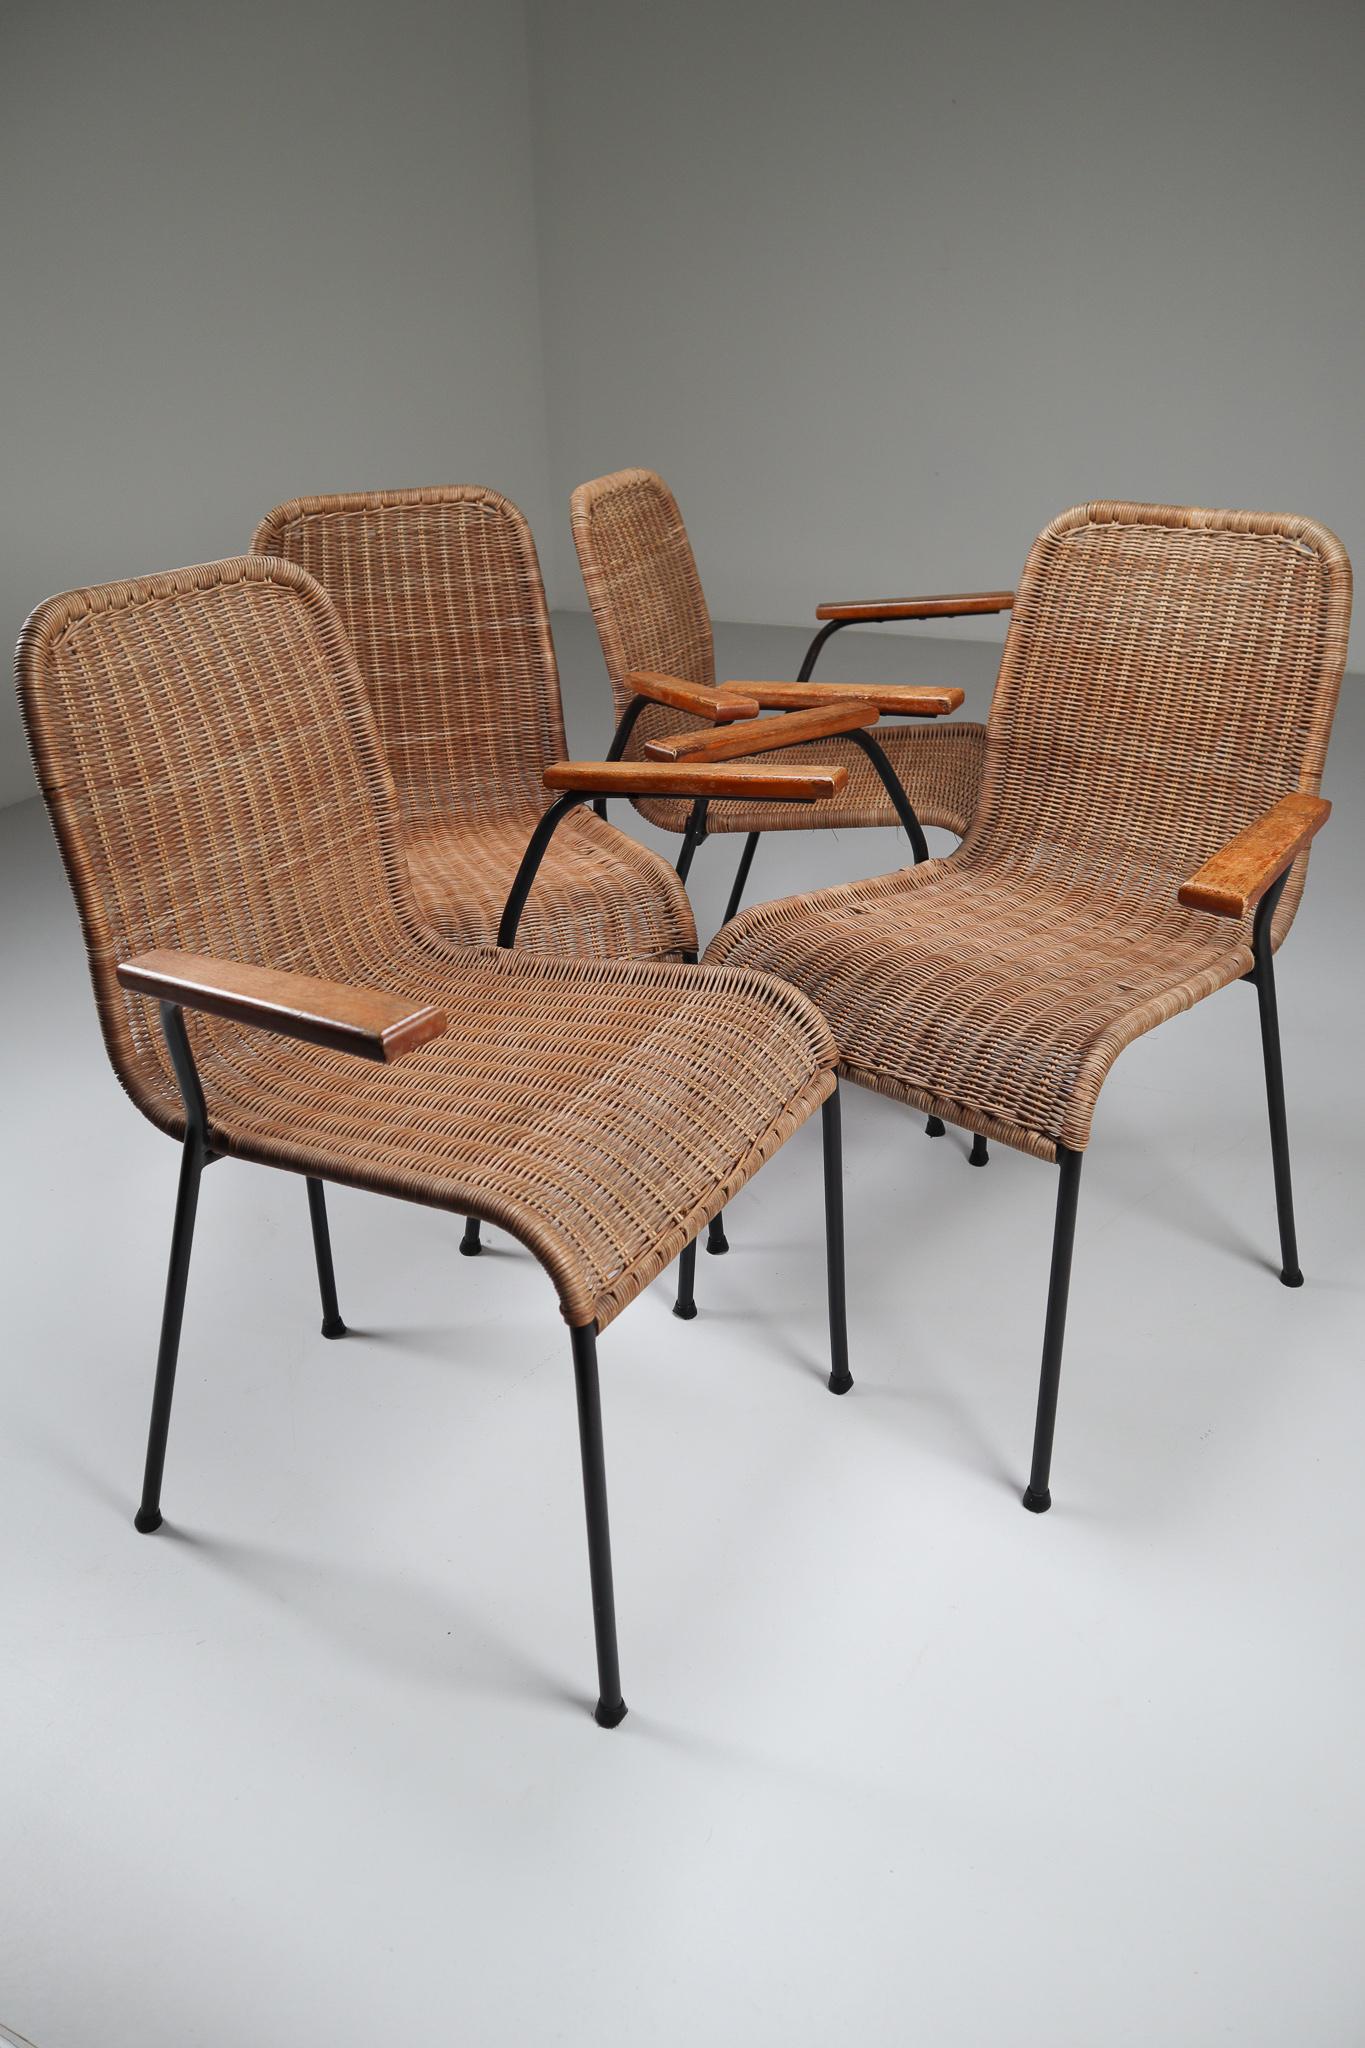 Patinated Metal Framed Armchairs with Woven Wicker Seat, The Netherlands, 1950 1